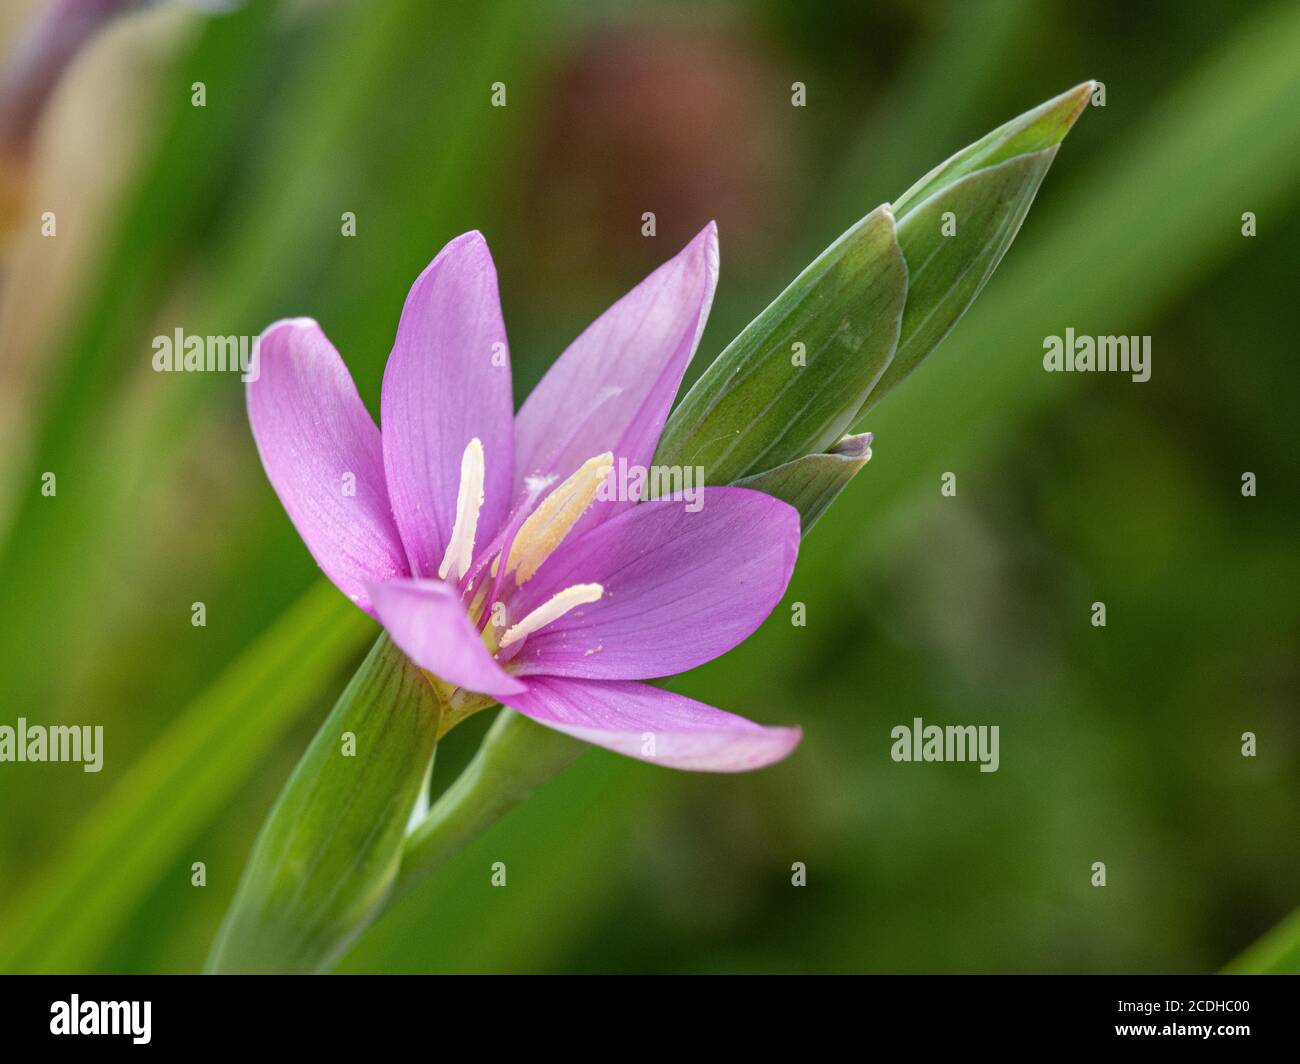 A close up of the pink starry flower of Olsynium junceum Stock Photo